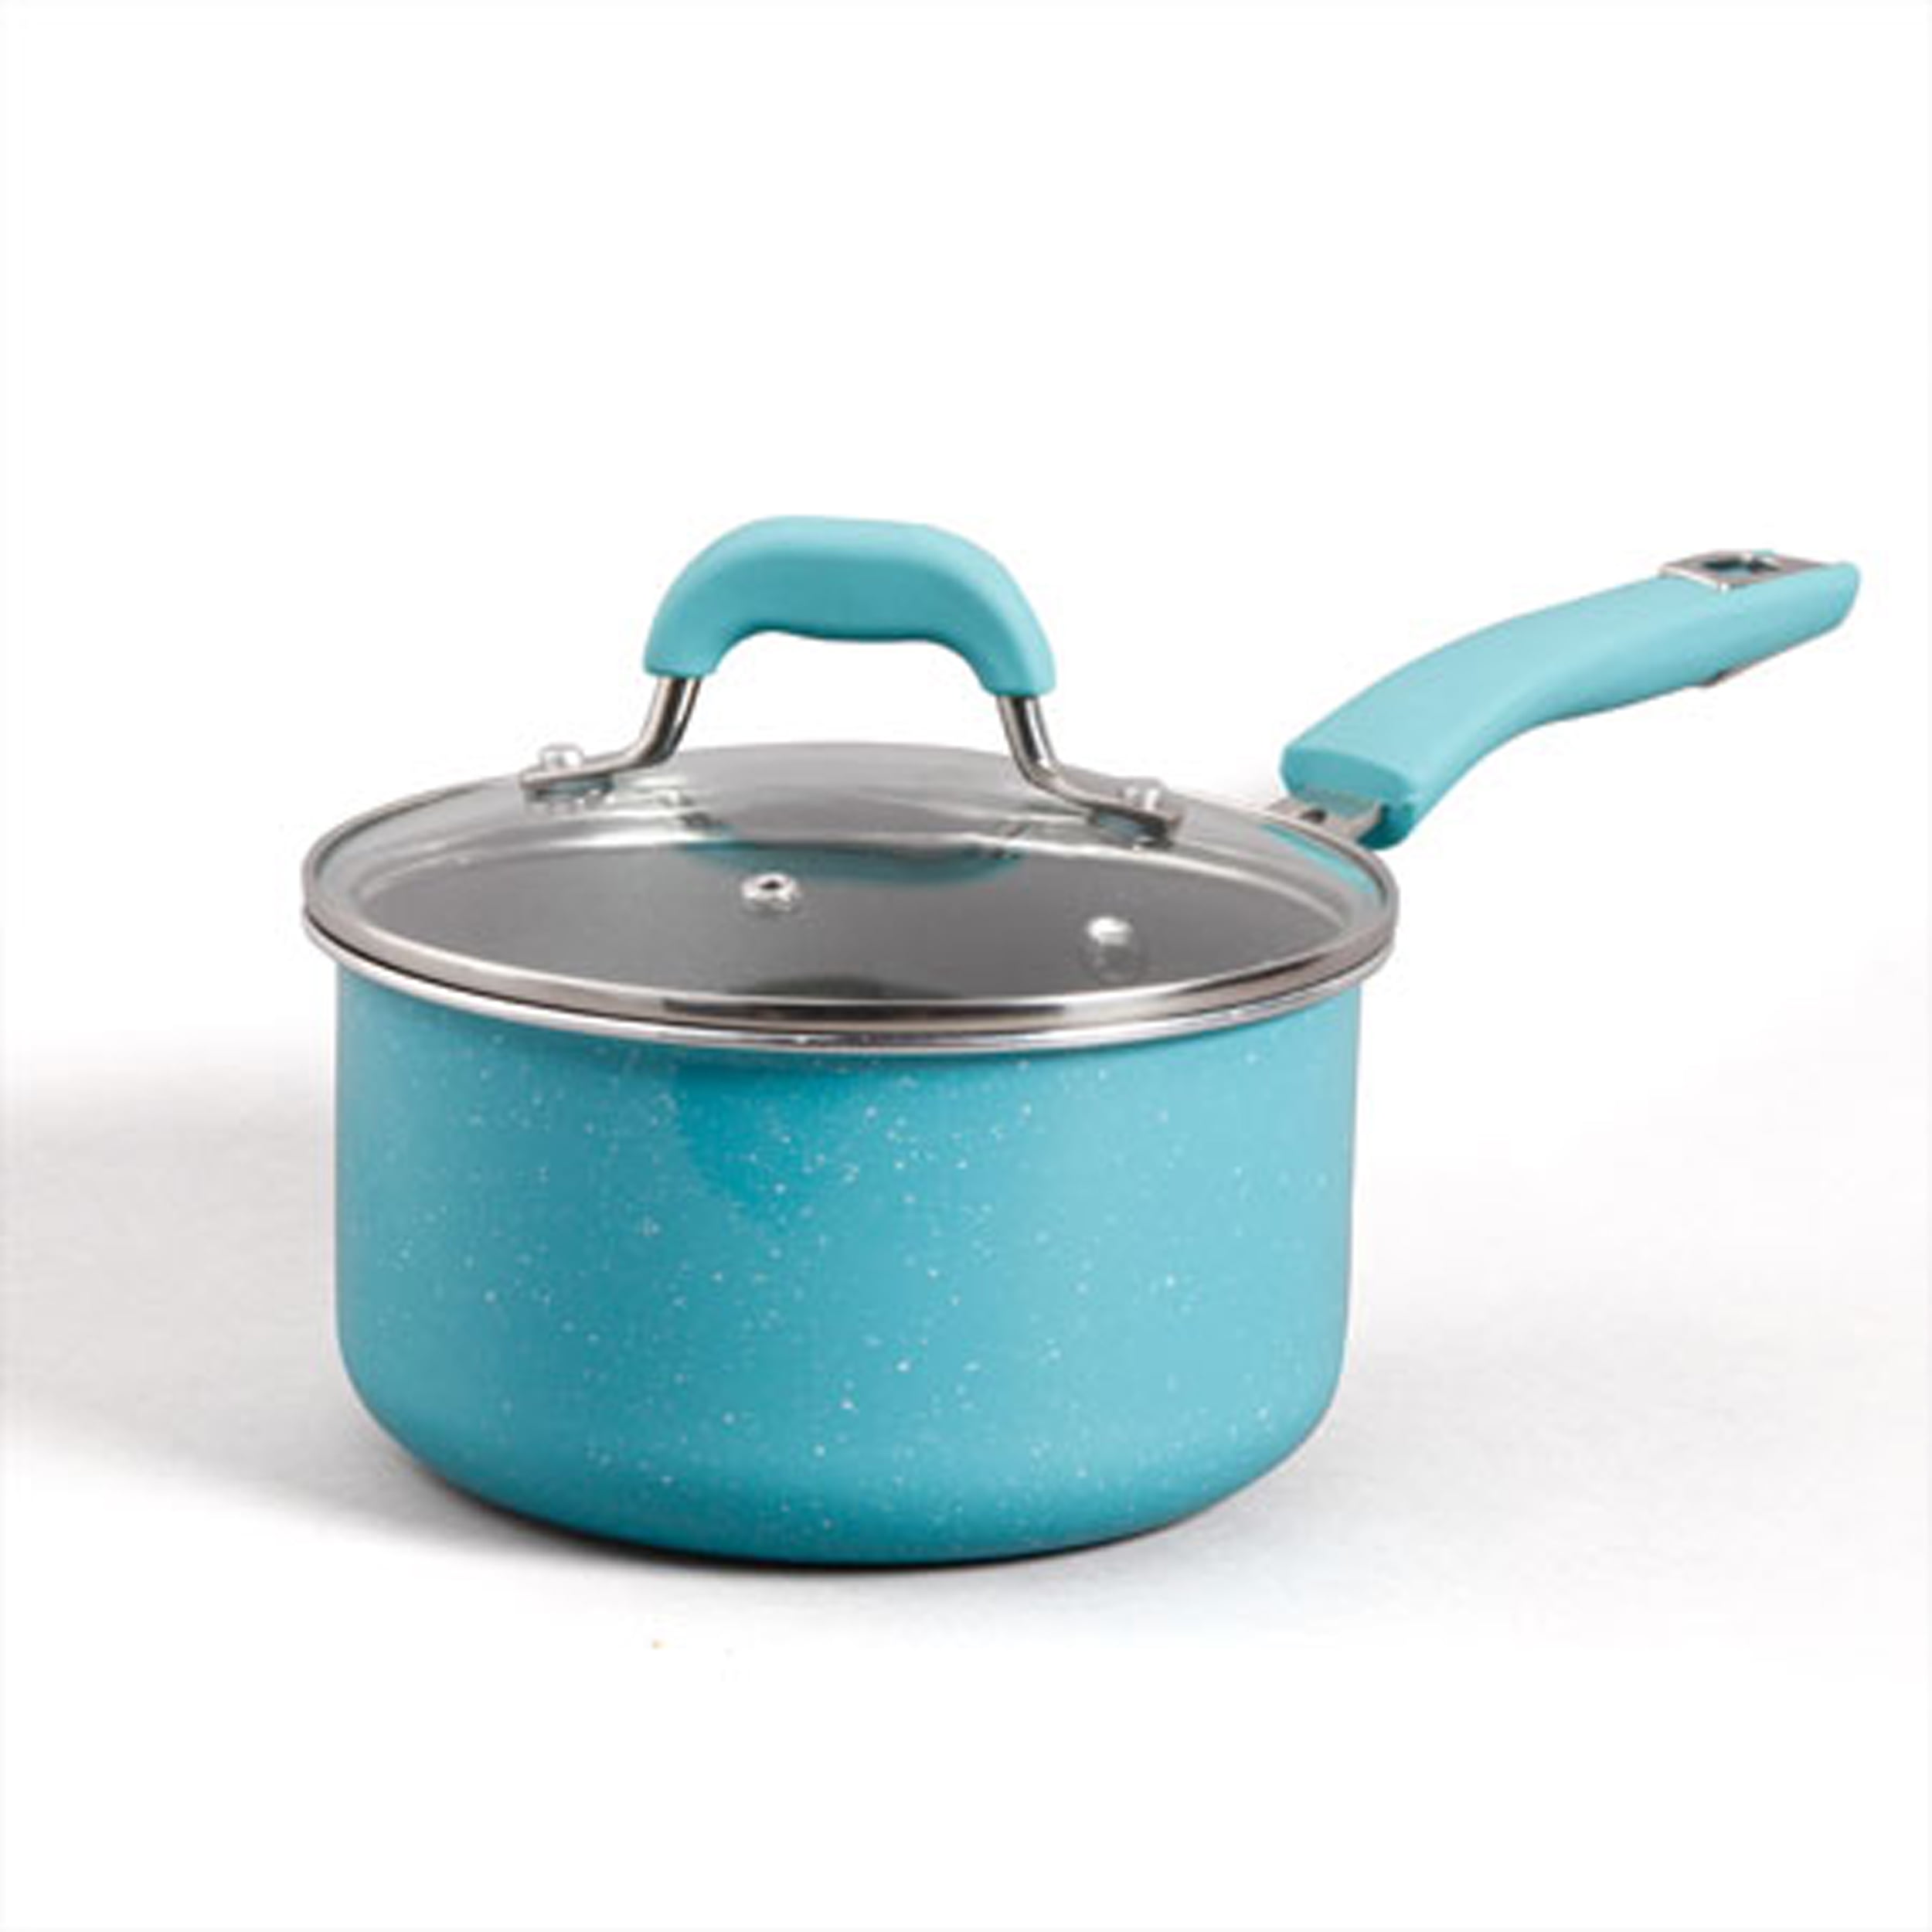 The Pioneer Woman Vintage Speckle 24-Piece Cookware Combo Set in Turquoise Bundle with Copper Charm Stainless Steel Copper Bottom Cookware Set, 10